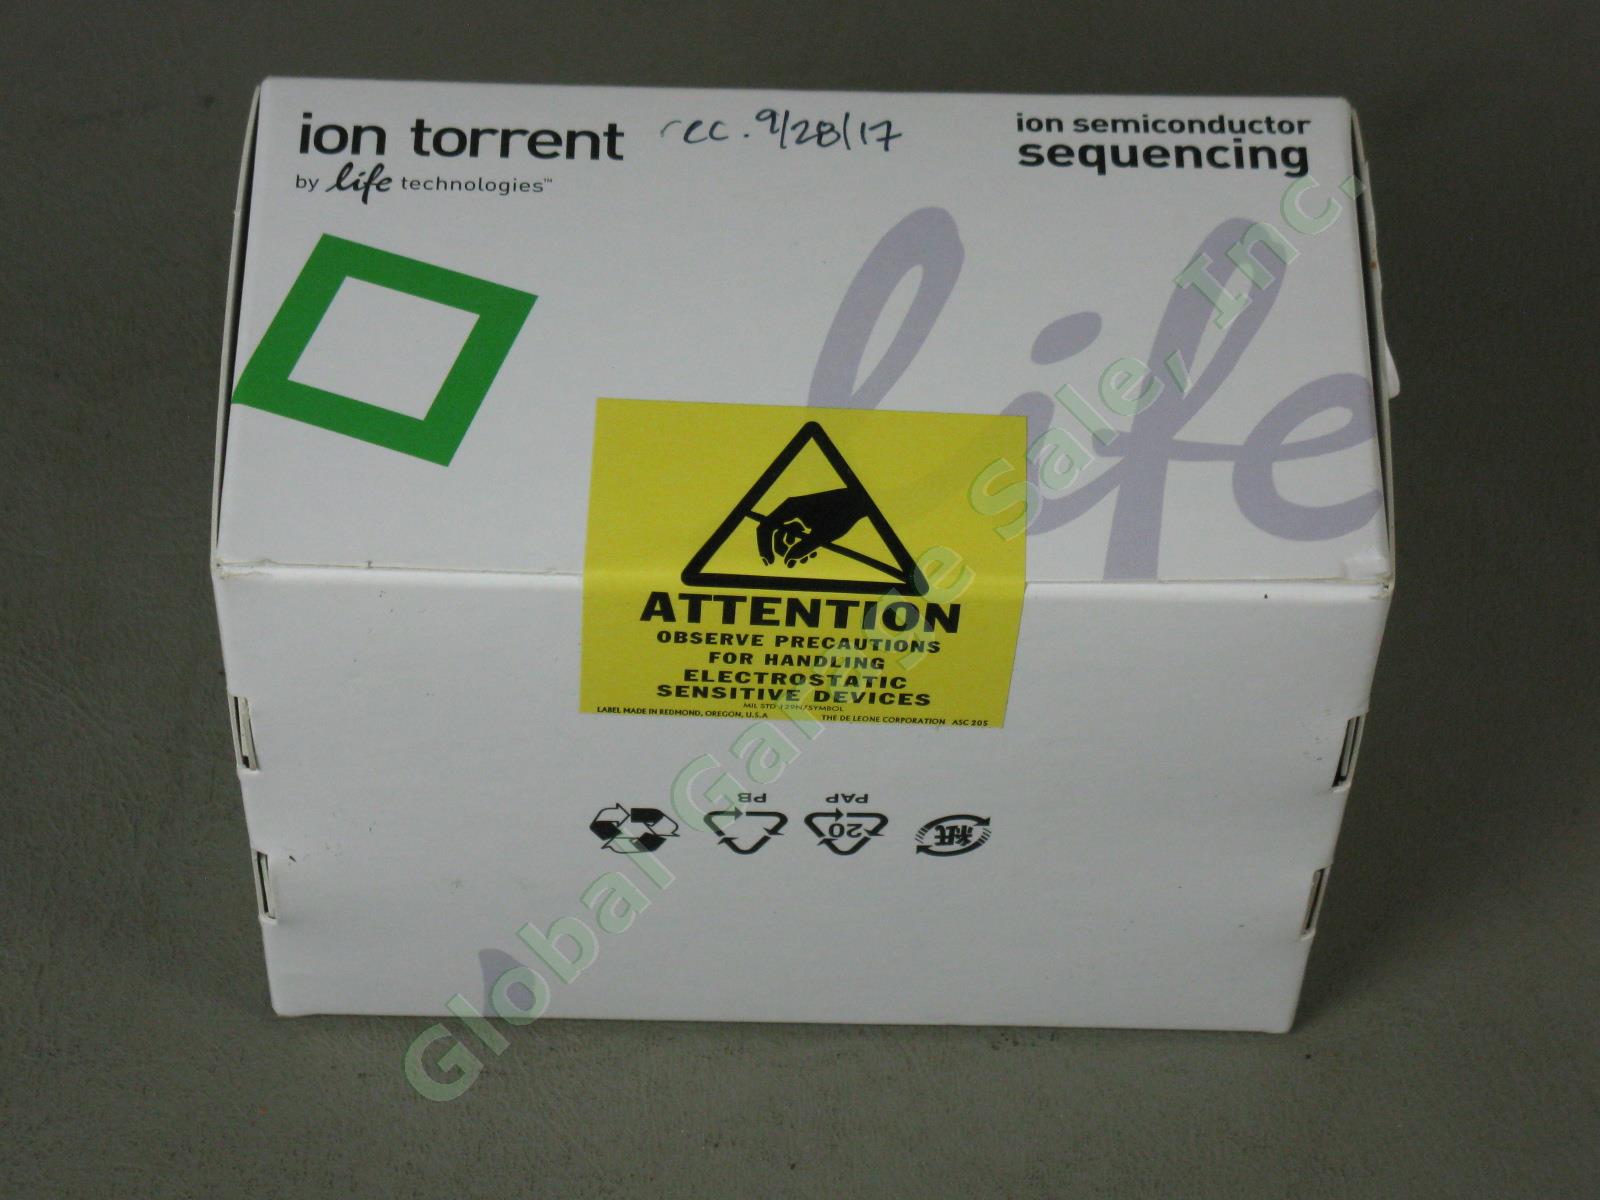 NEW! Sealed Life Technologies Ion Torrent Sequencing 316 Chip Kit V2 4-Pack 3